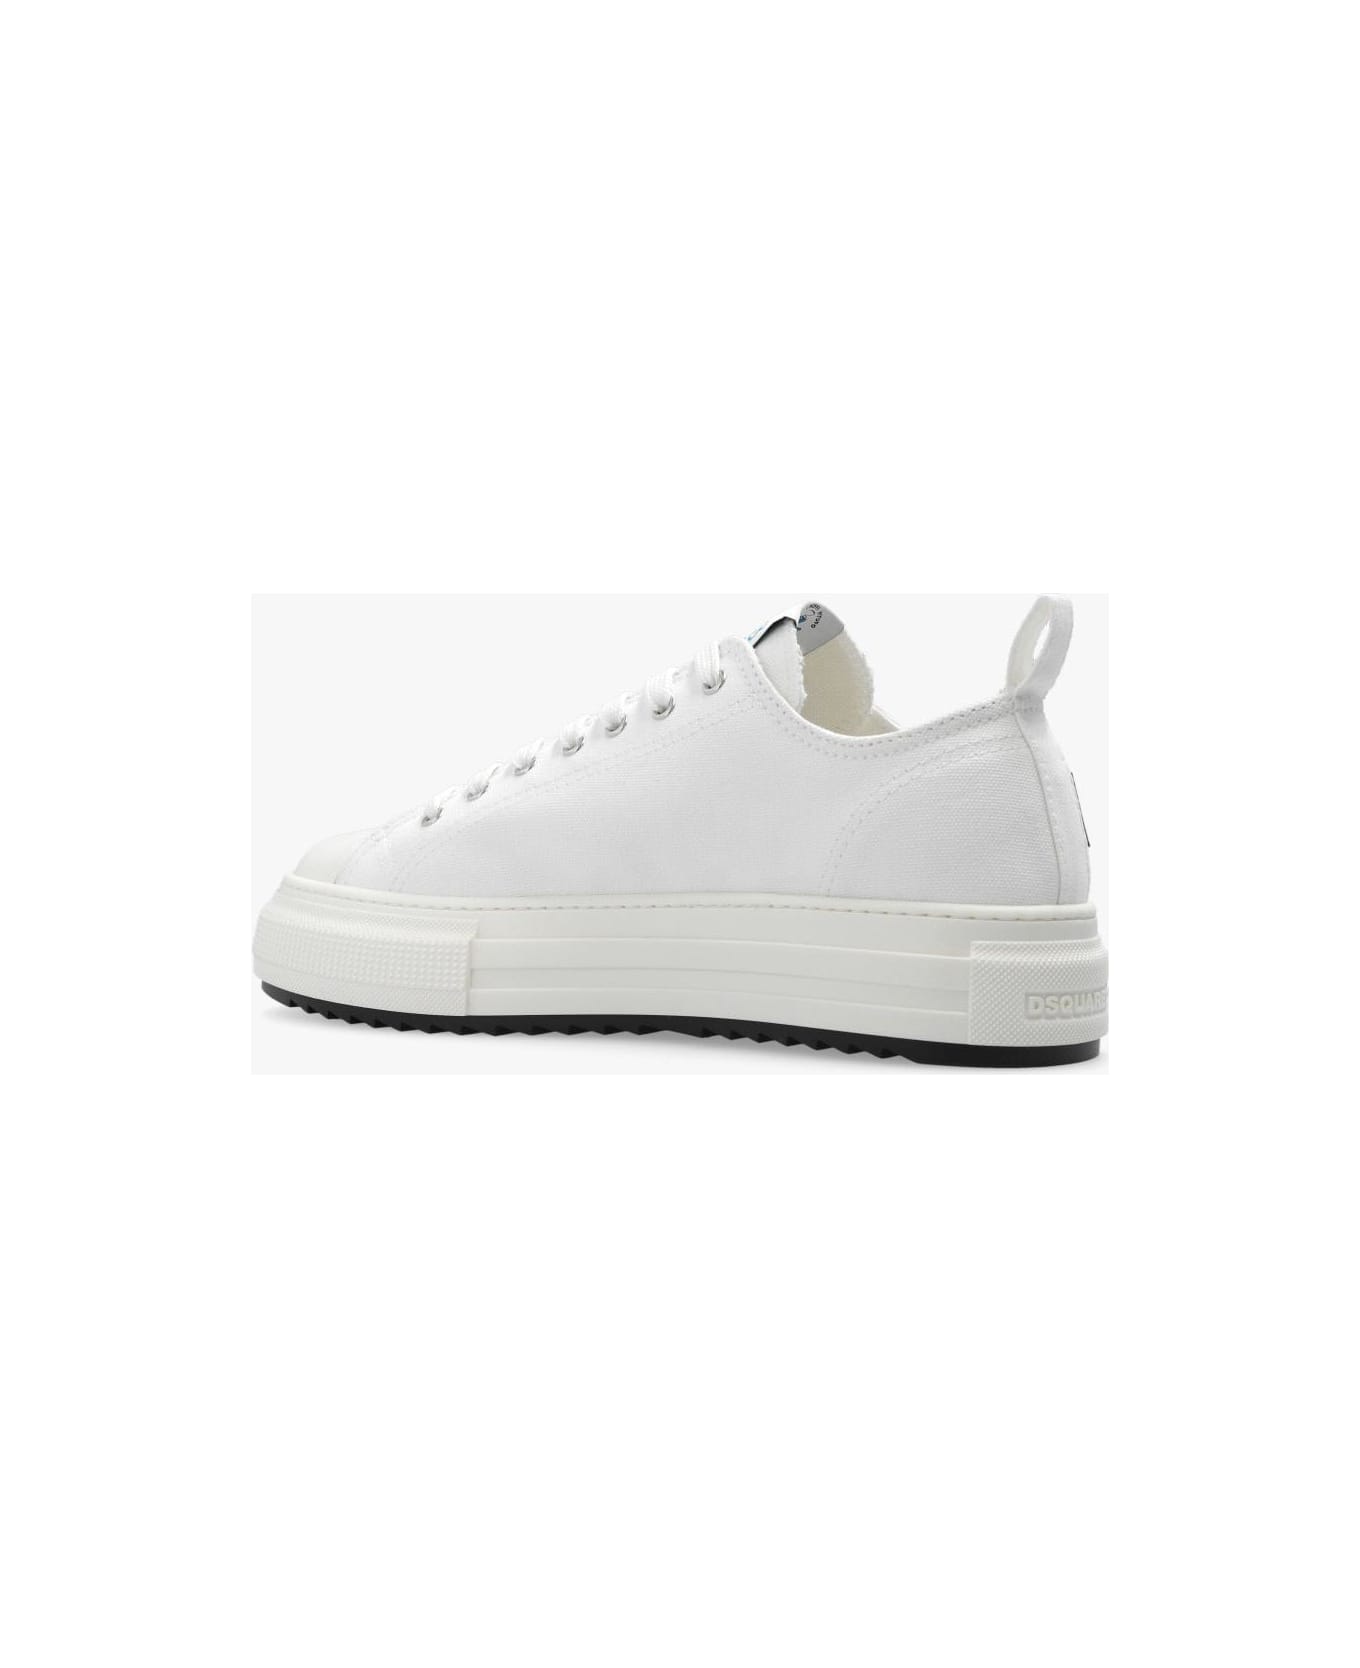 Dsquared2 X The Smurfs Berlin Sneakers - Bianco